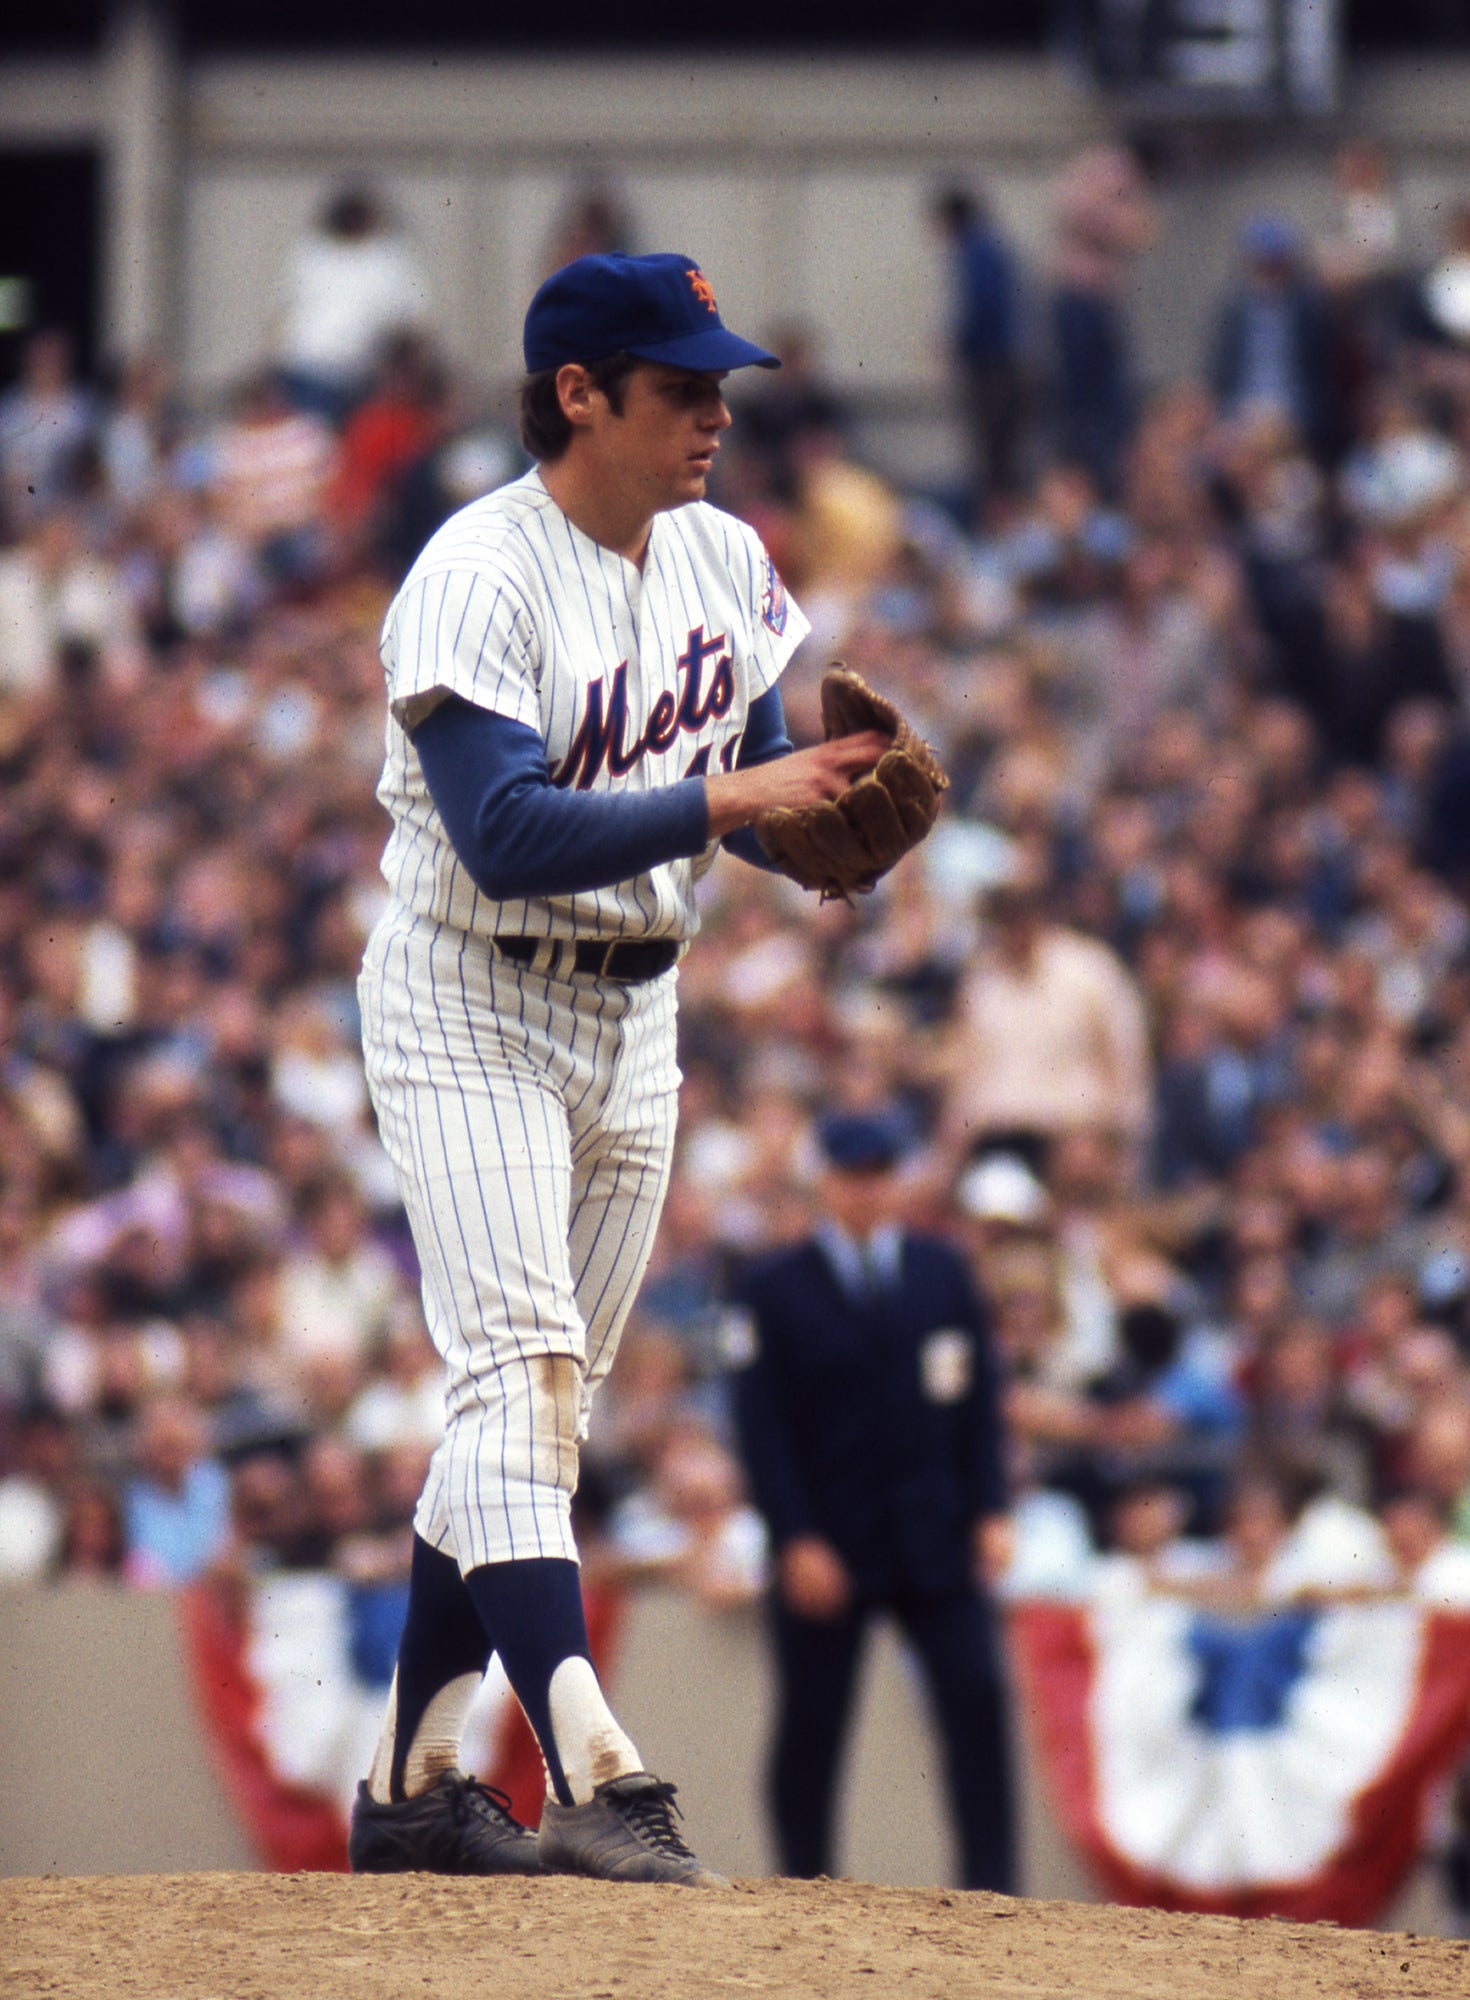 Remembering Mets' legend Tom Seaver, who died two years ago this